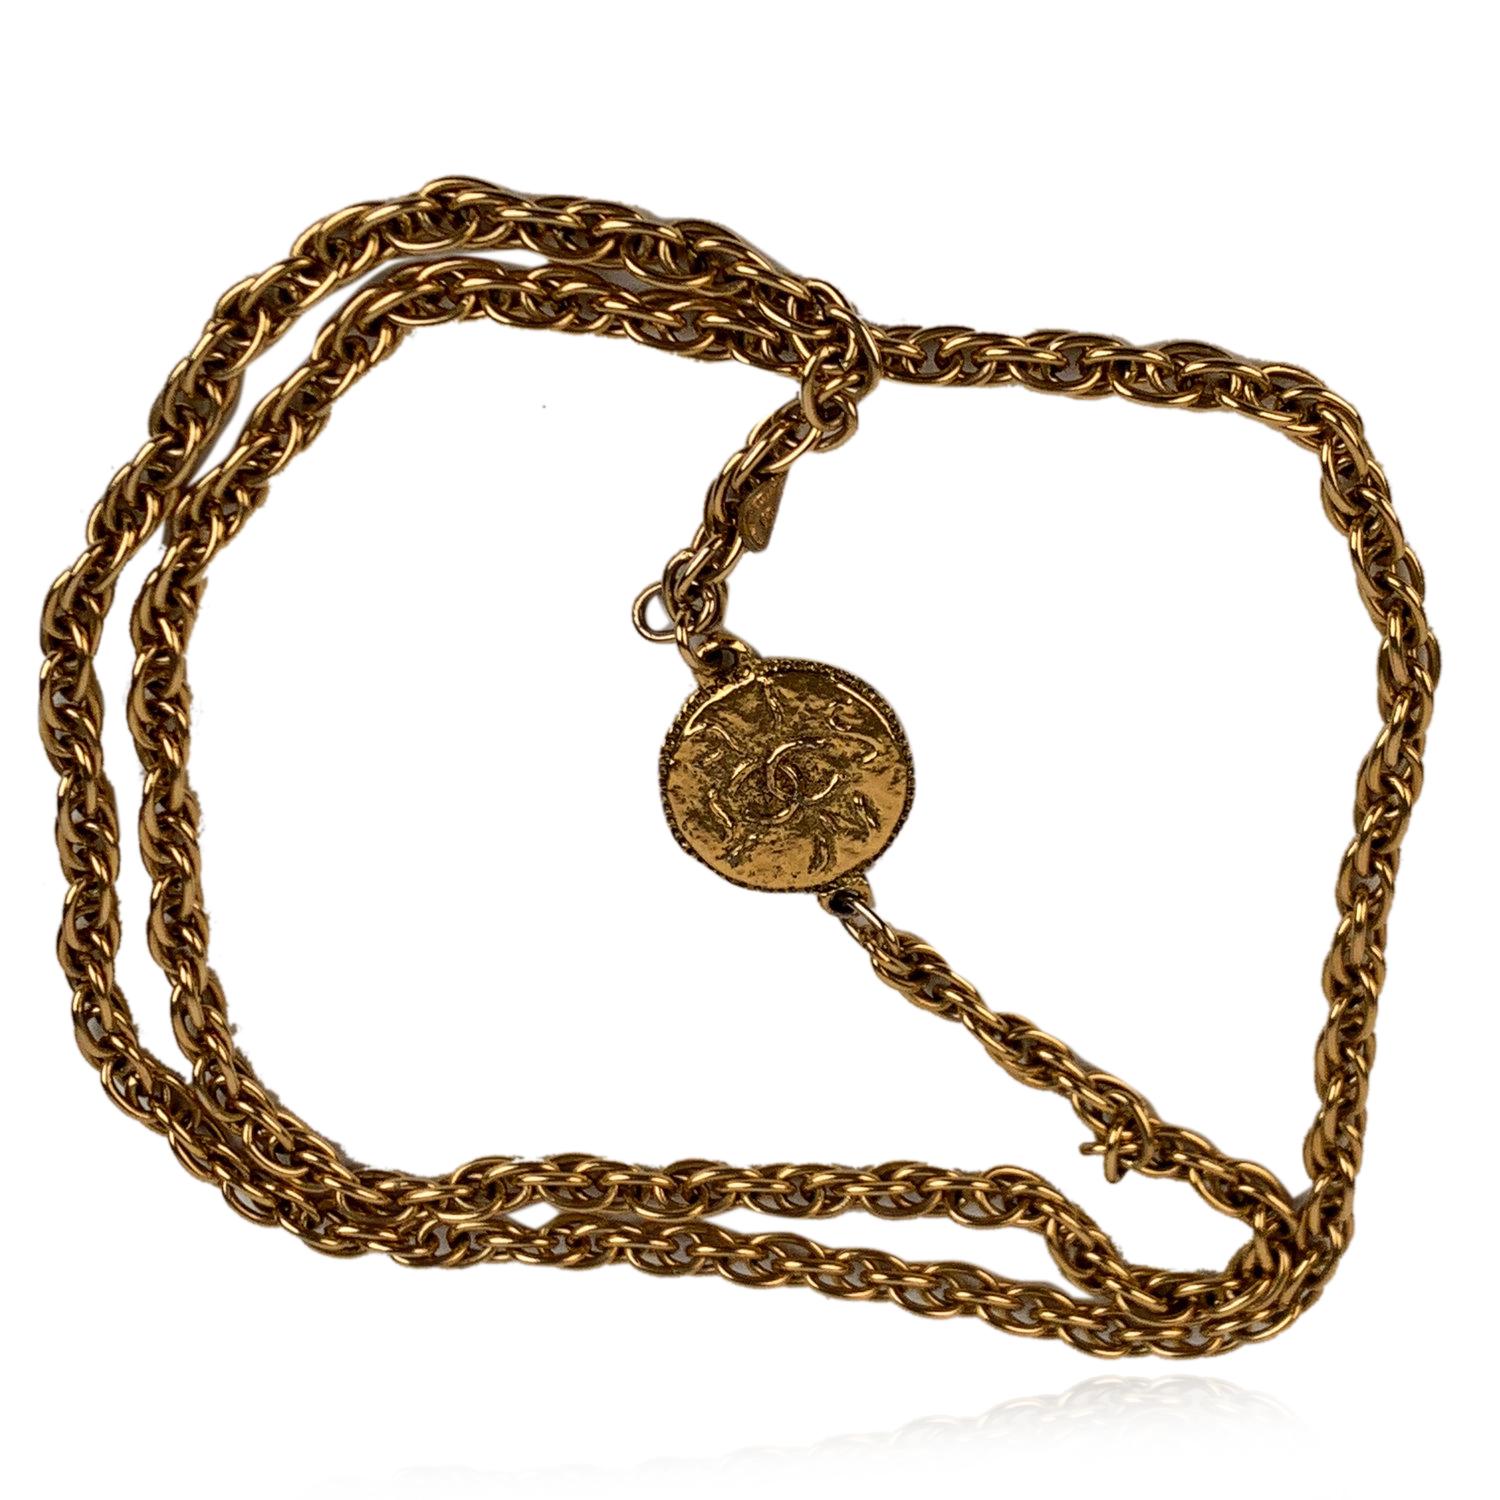 - Period/ Era: Circa 1970-1980 - Long necklace feauturing a gold metal chain - The centerpiece is a round gold metal medallio with embossed 'CHANEL' and CC logos - No closure - Total lenght (drop): 17 inches - 43,2 cm . 'CHANEL  - Made in France'